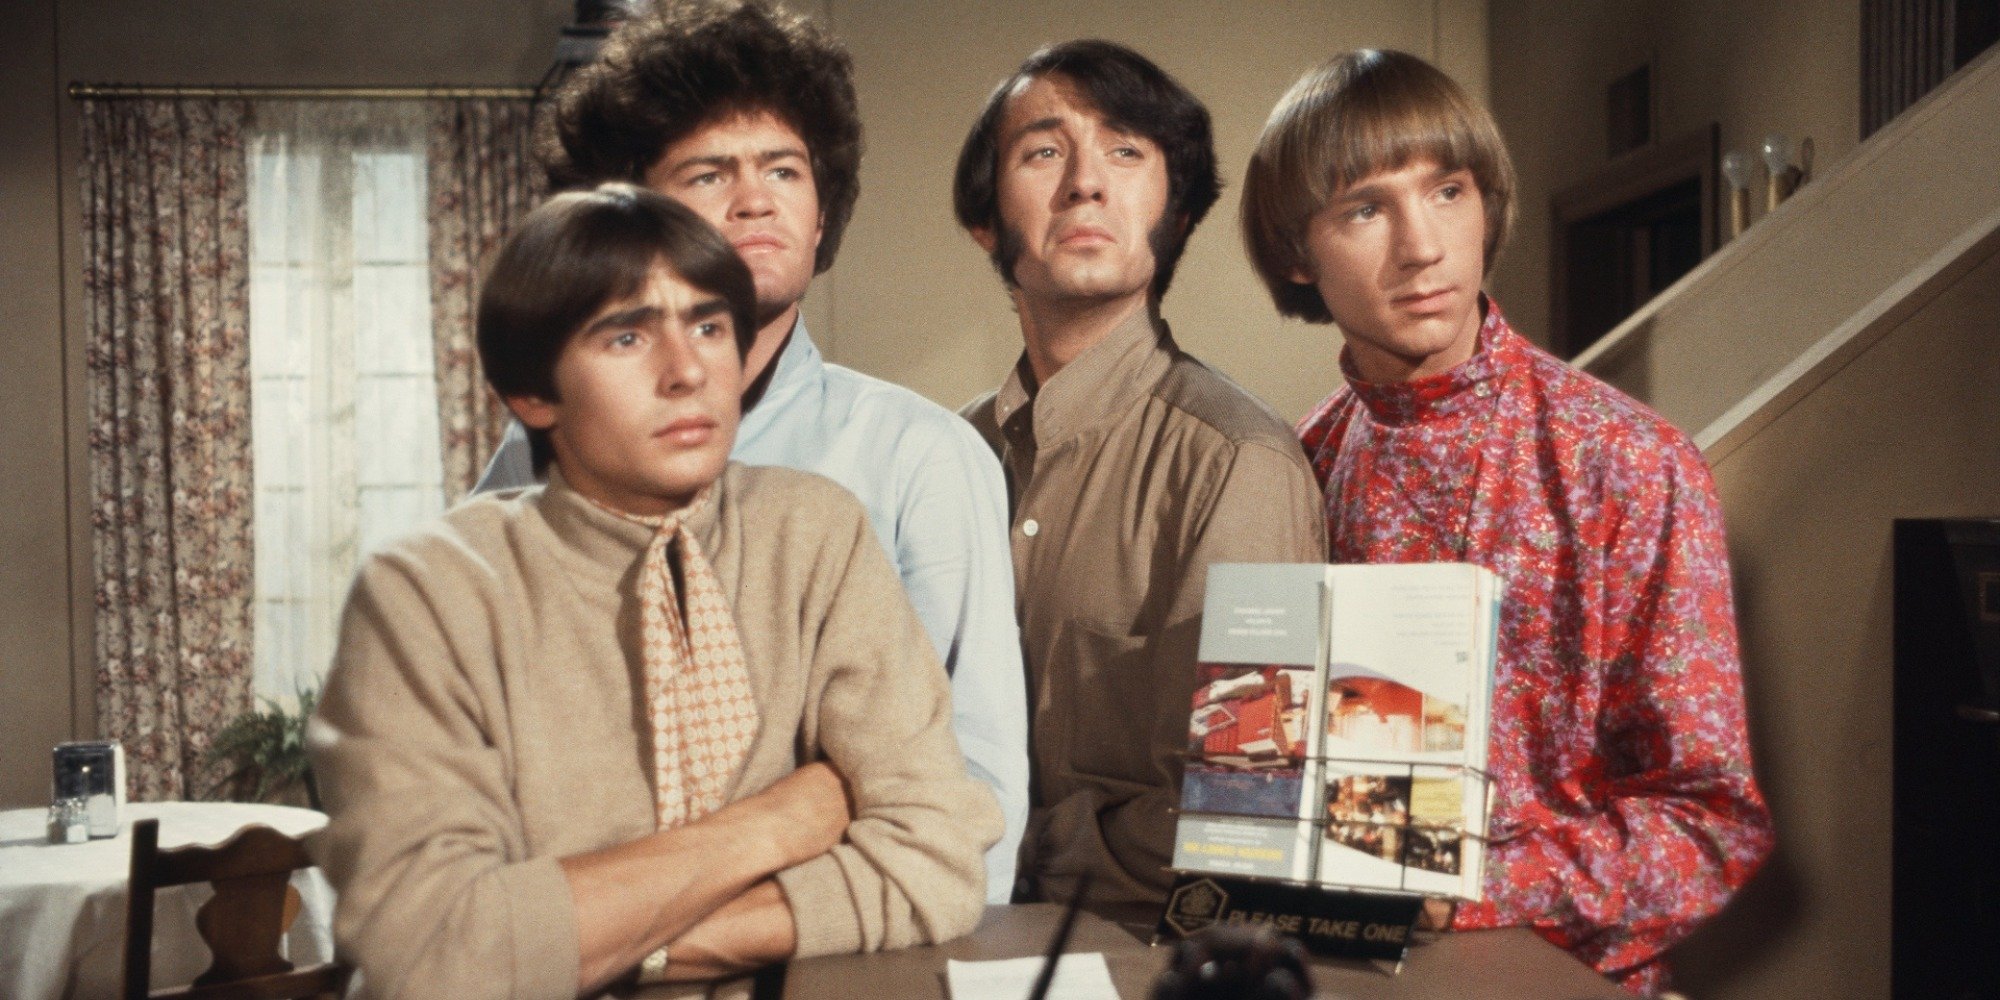 Davy Jones, Mike Nesmith, Peter Tork, and Micky Dolenz